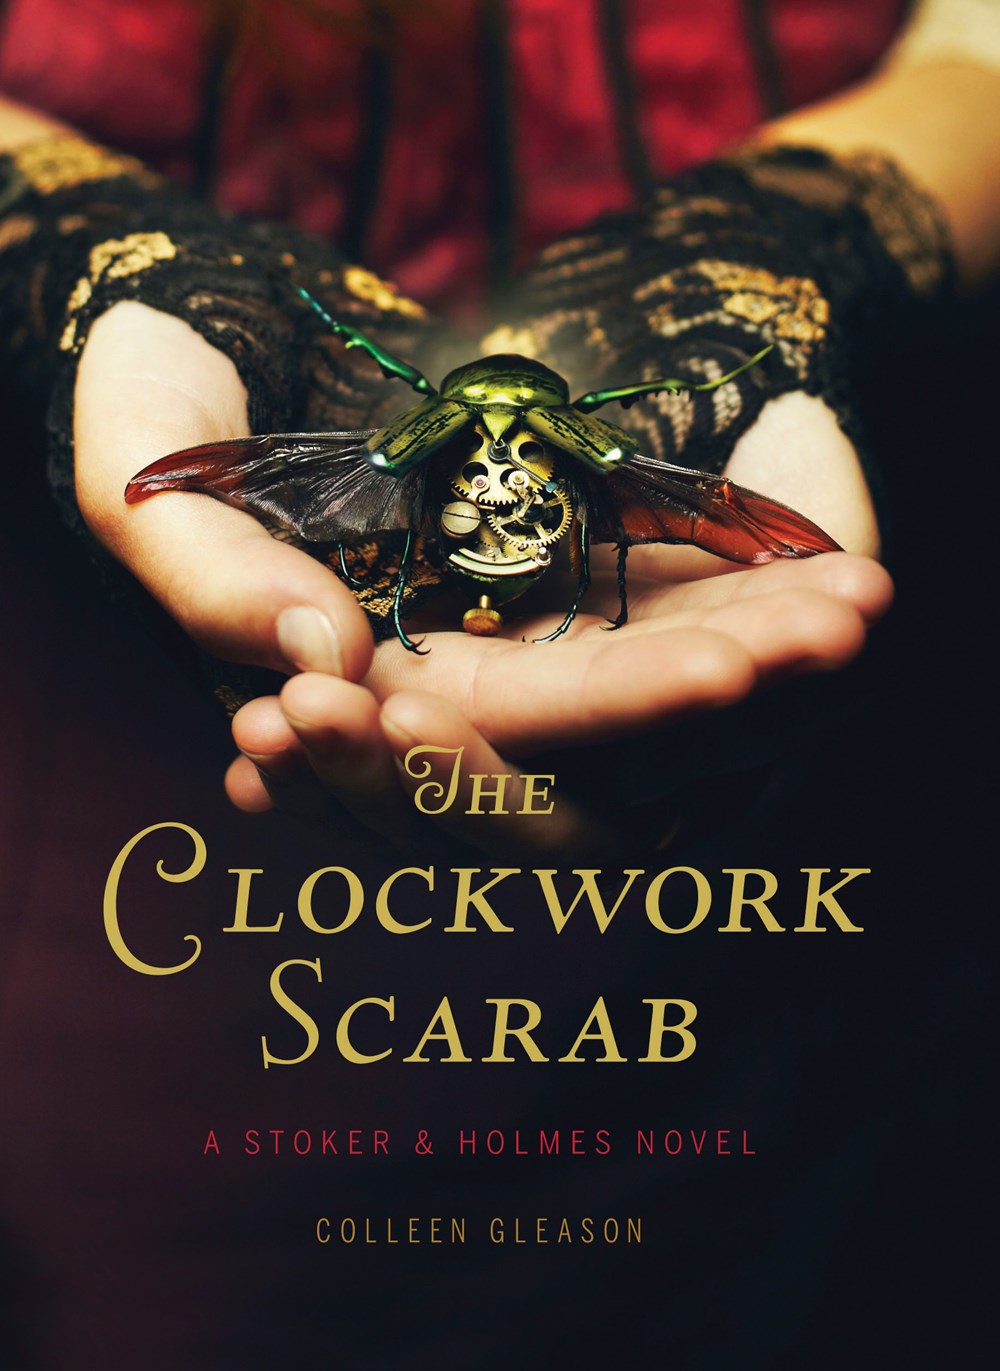 The Clockwork Scarab by Colleen Gleason Book Cover.jpg